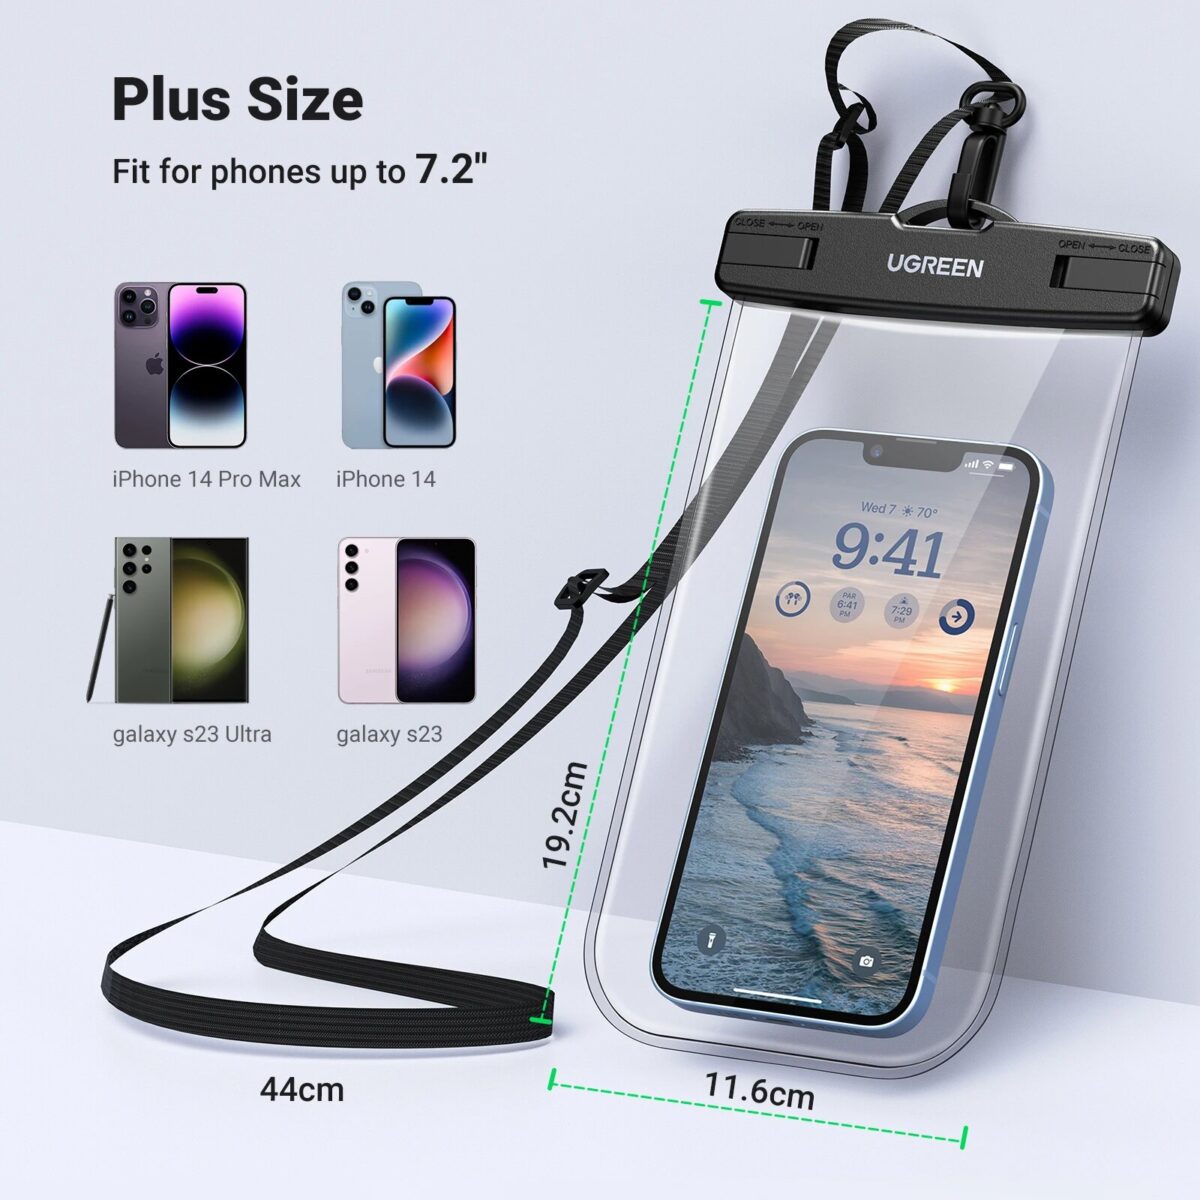 UGREEN 7 2 inch IPX8 Waterproof Phone Case Bag For iPhone 14 13 12 Pro Max 5 UGREEN 7.2 inch IPX8 Waterproof Phone Case Bag For iPhone 14 13 12 Pro Max Protective Case Universal Swimming Pouch Bag